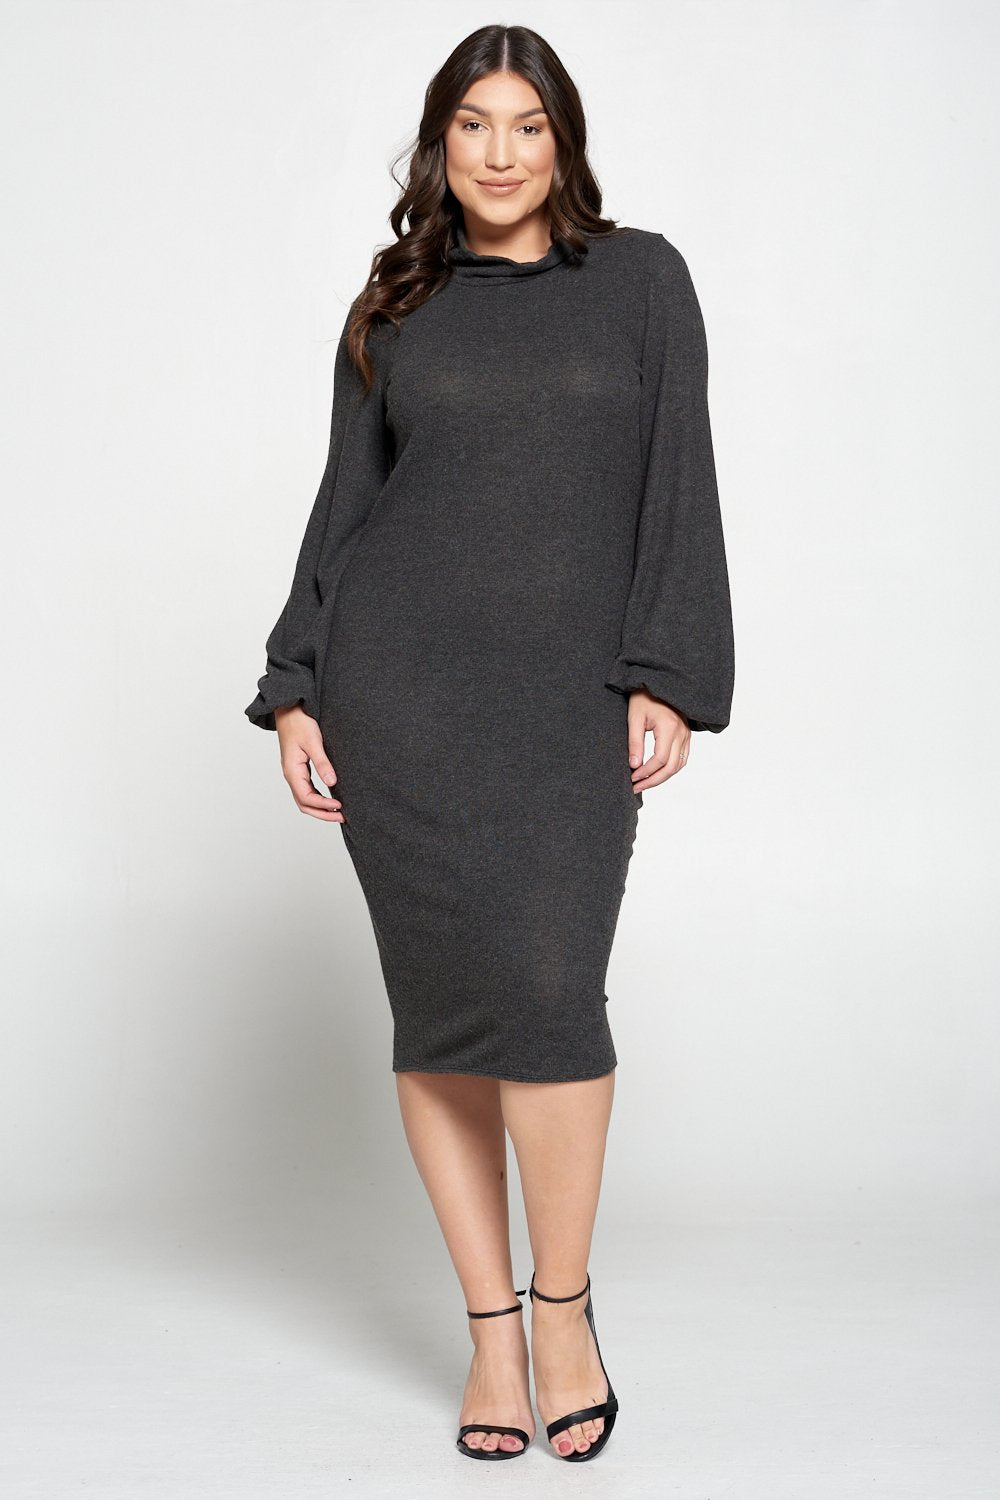 livd L I V D women's contemporary plus size boutique hacci knit sweater dress in charcoal